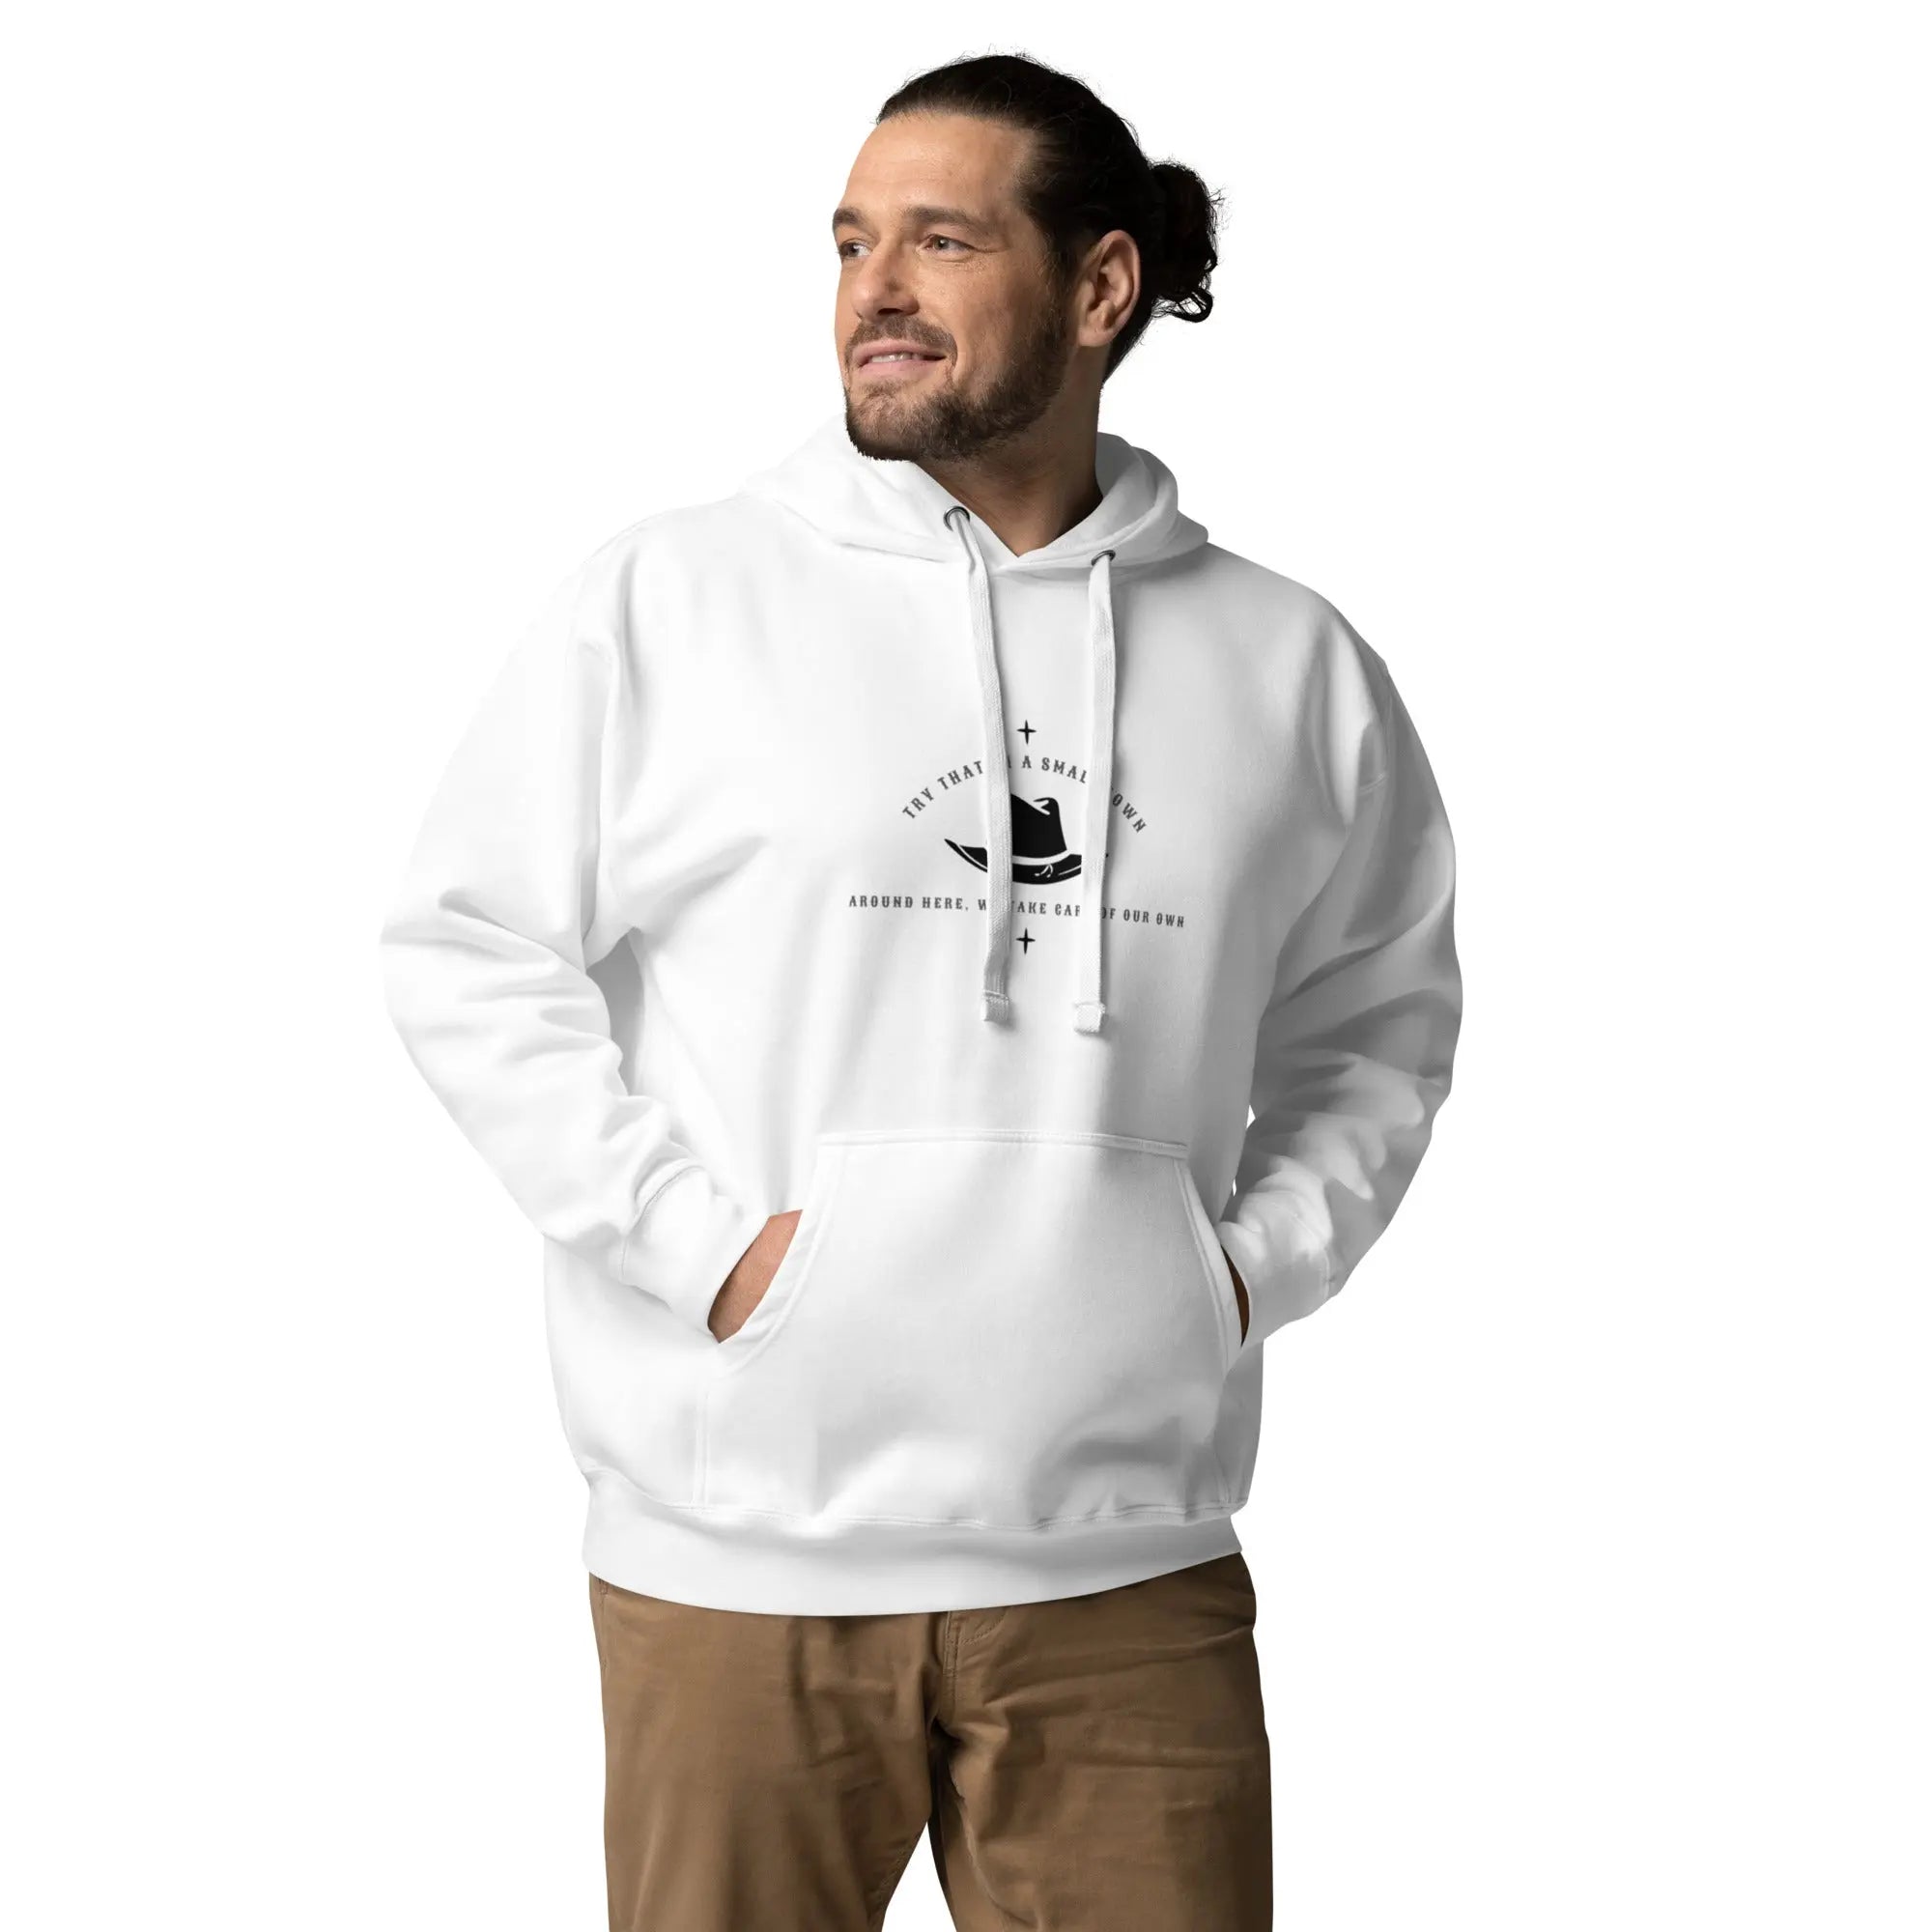 Small Town Boy Hoodie - Image #1